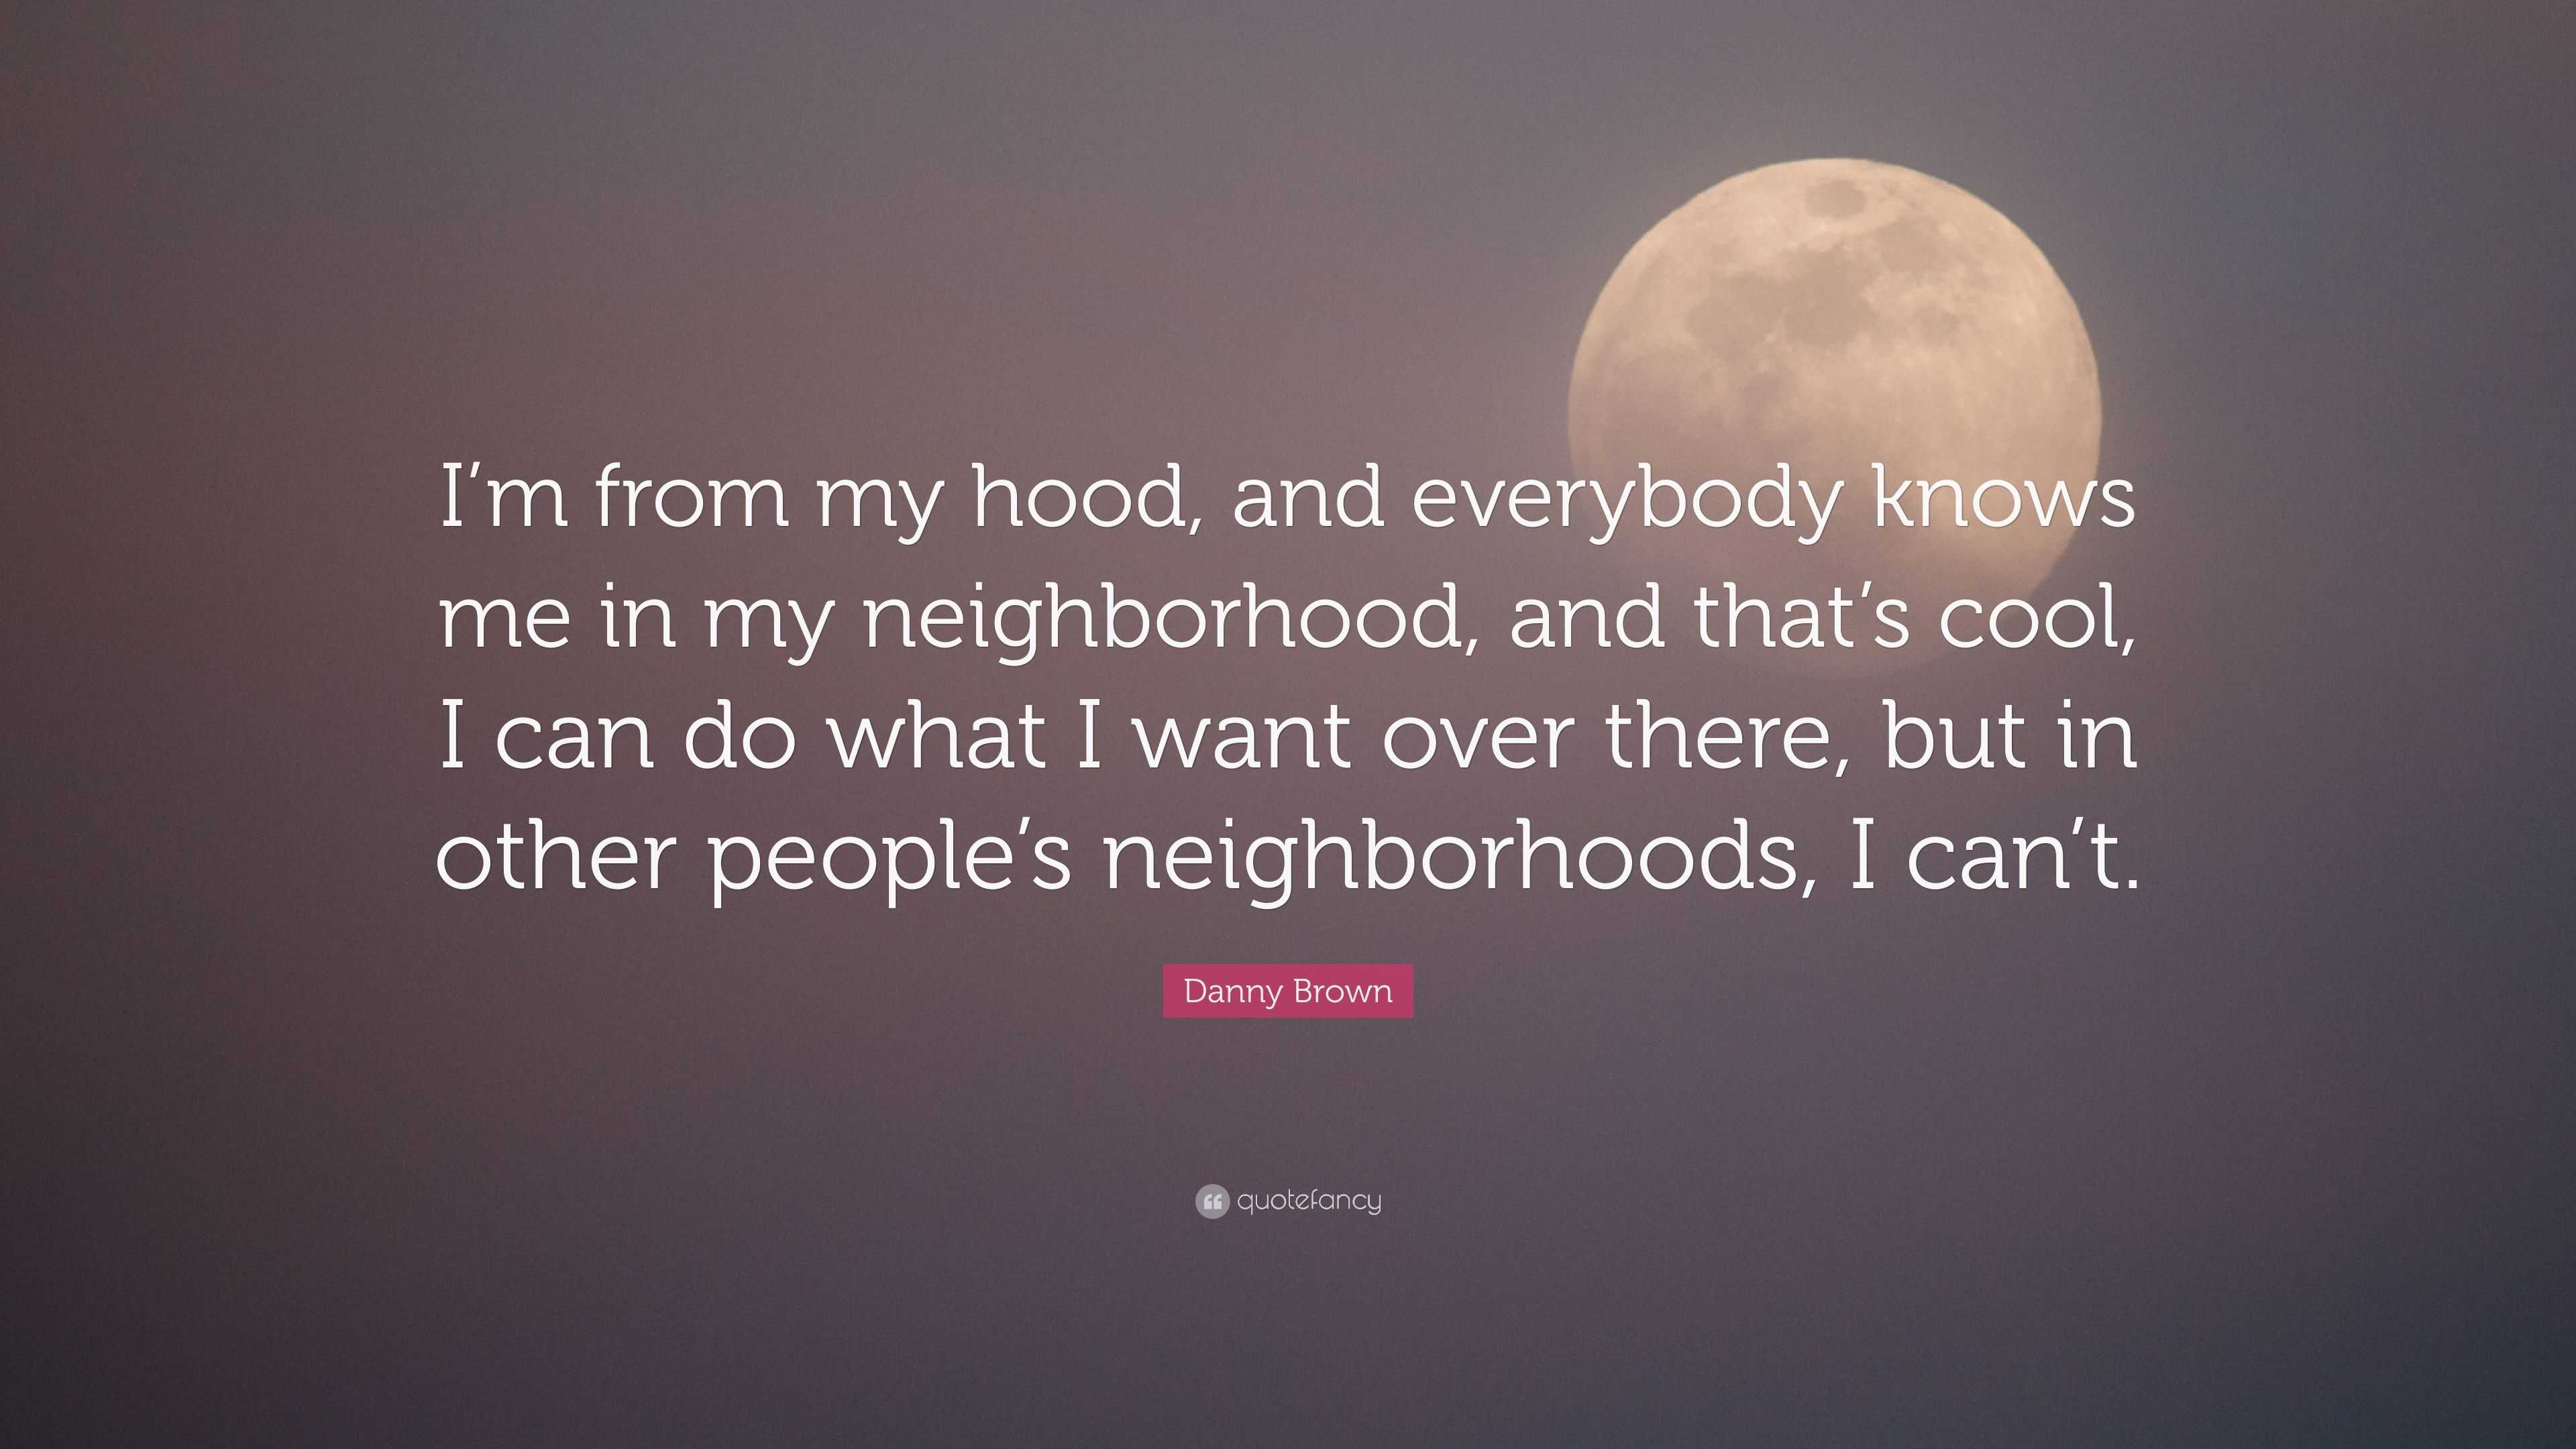 Danny Brown Quote I M From My Hood And Everybody Knows Me In My Neighborhood And That S Cool I Can Do What I Want Over There But In Ot 7 Wallpapers Quotefancy